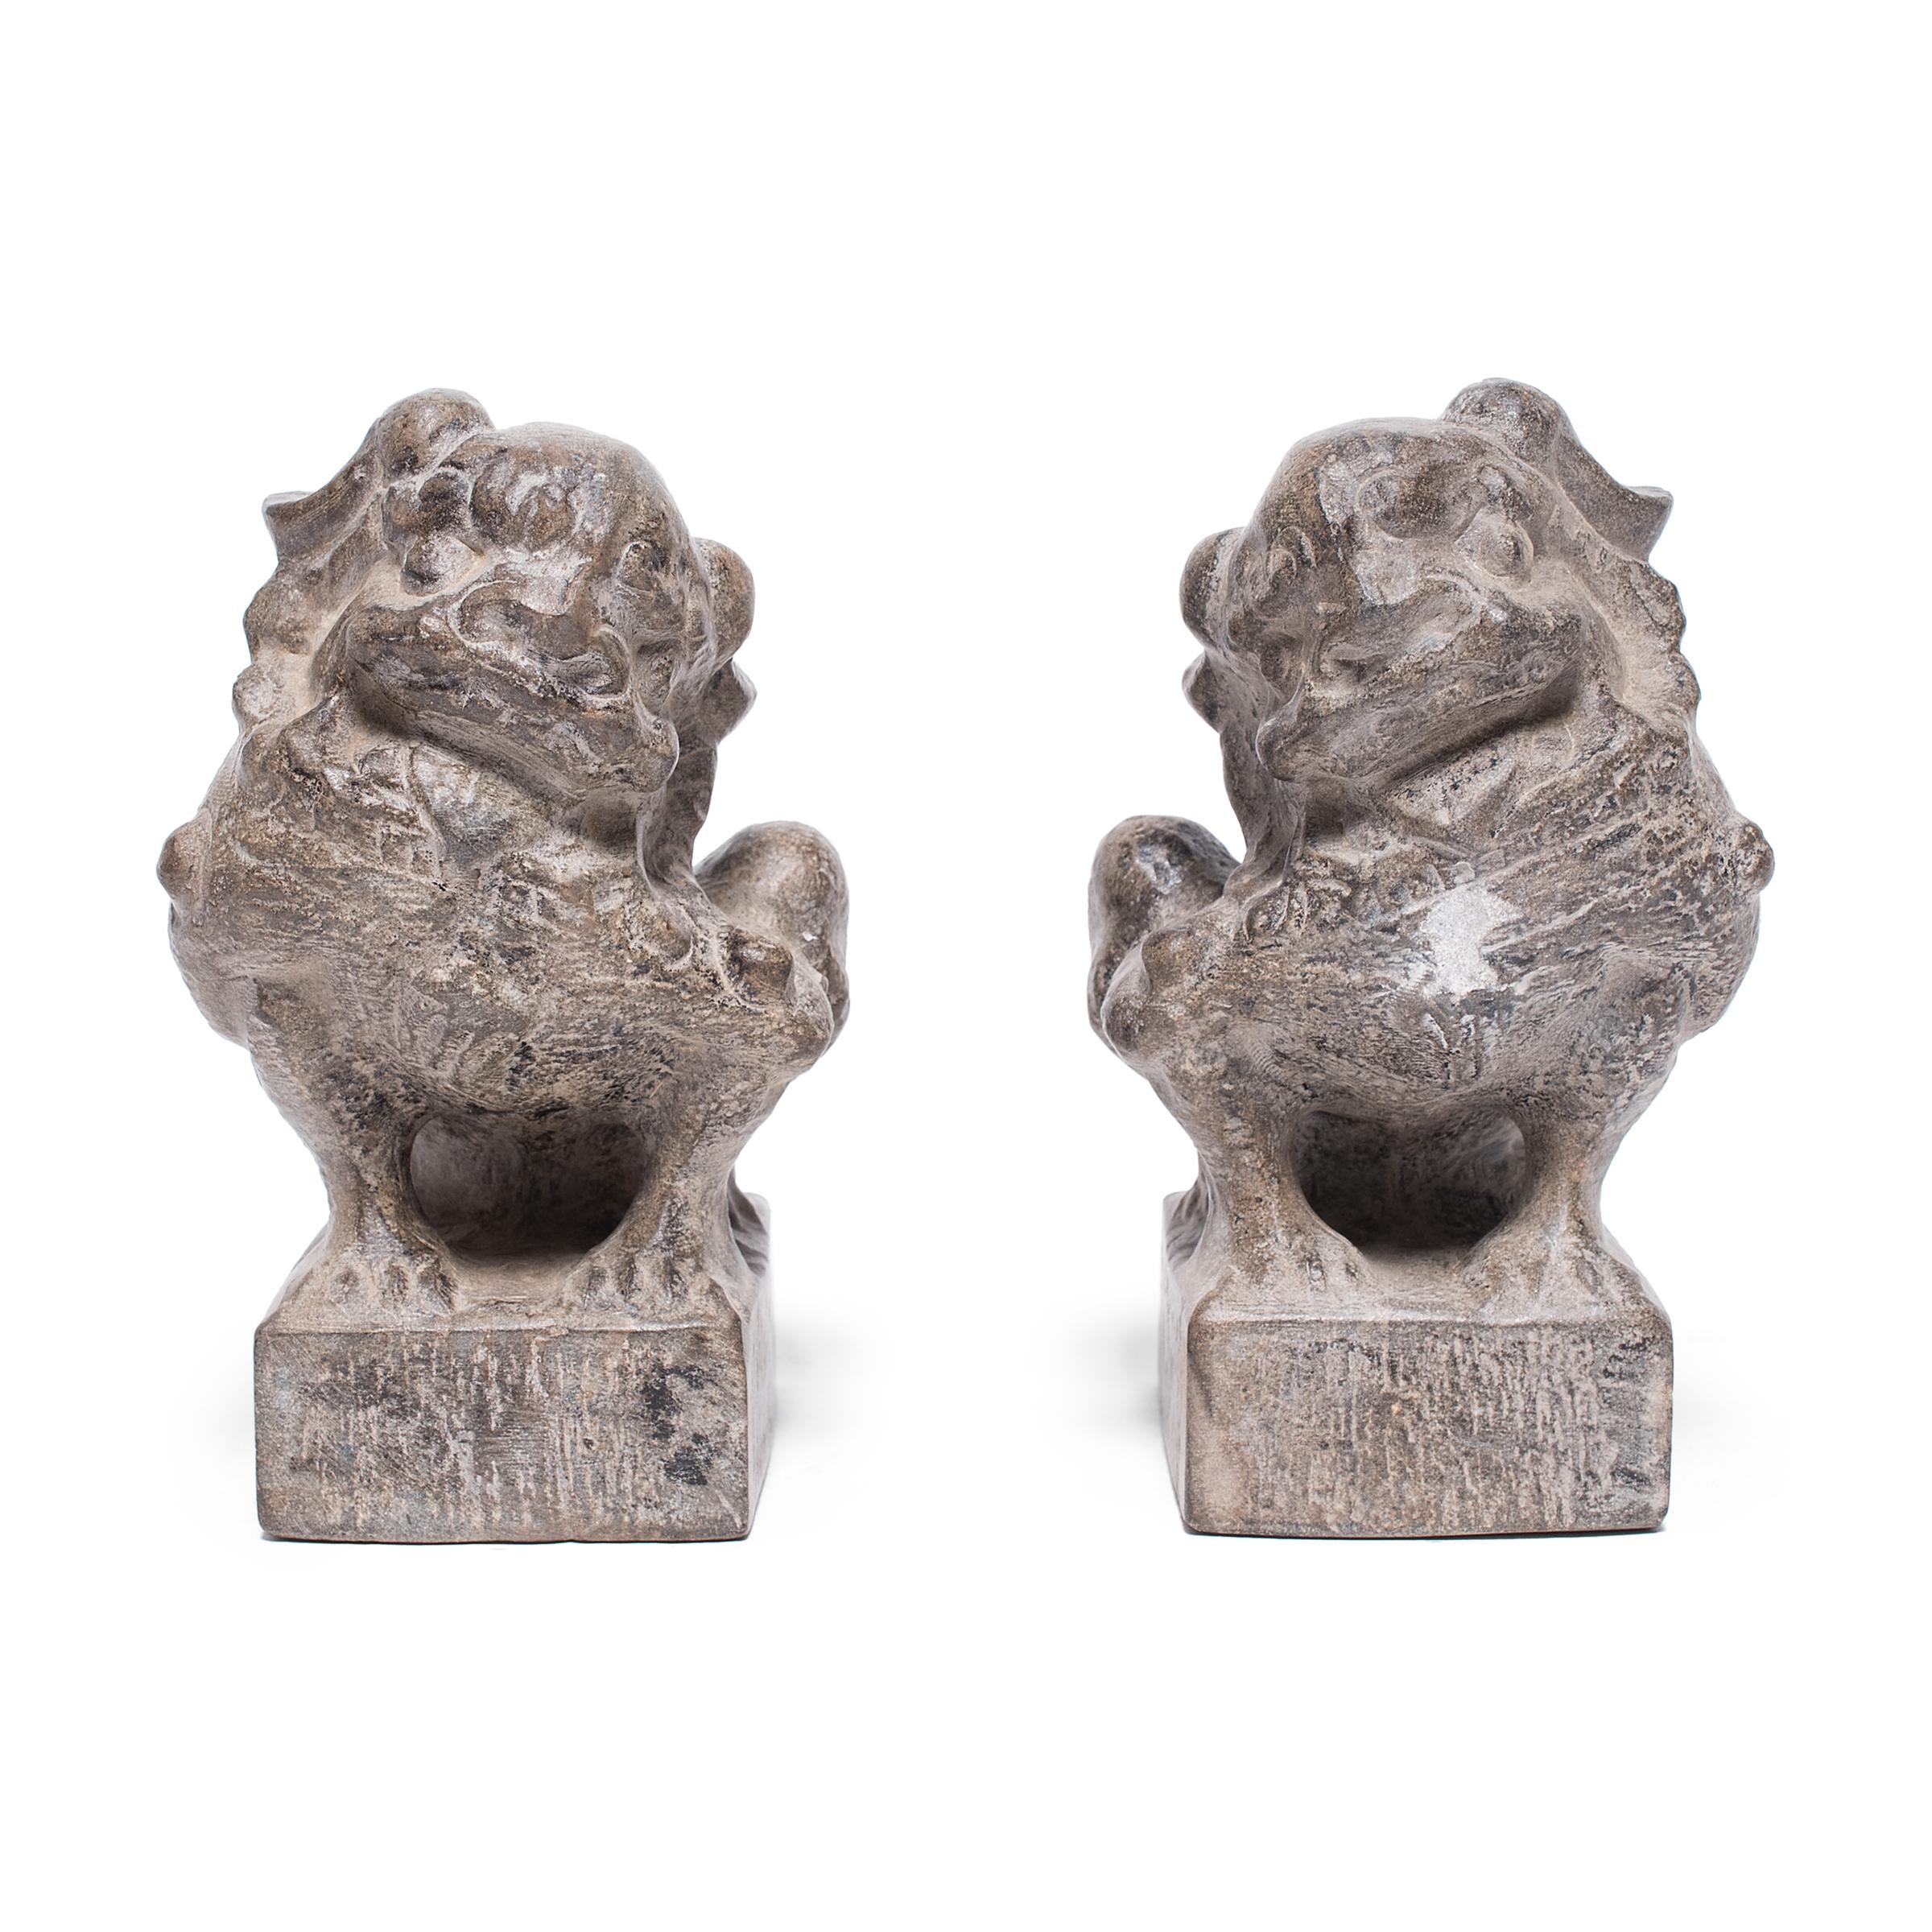 With curly manes, fluffy tails, and playful expressions, these petite stone fu dogs are adorable companions and benevolent guardians of the home. Also known as shizi, the pair represents yin and yang, the dual forces of the universe. Standing in